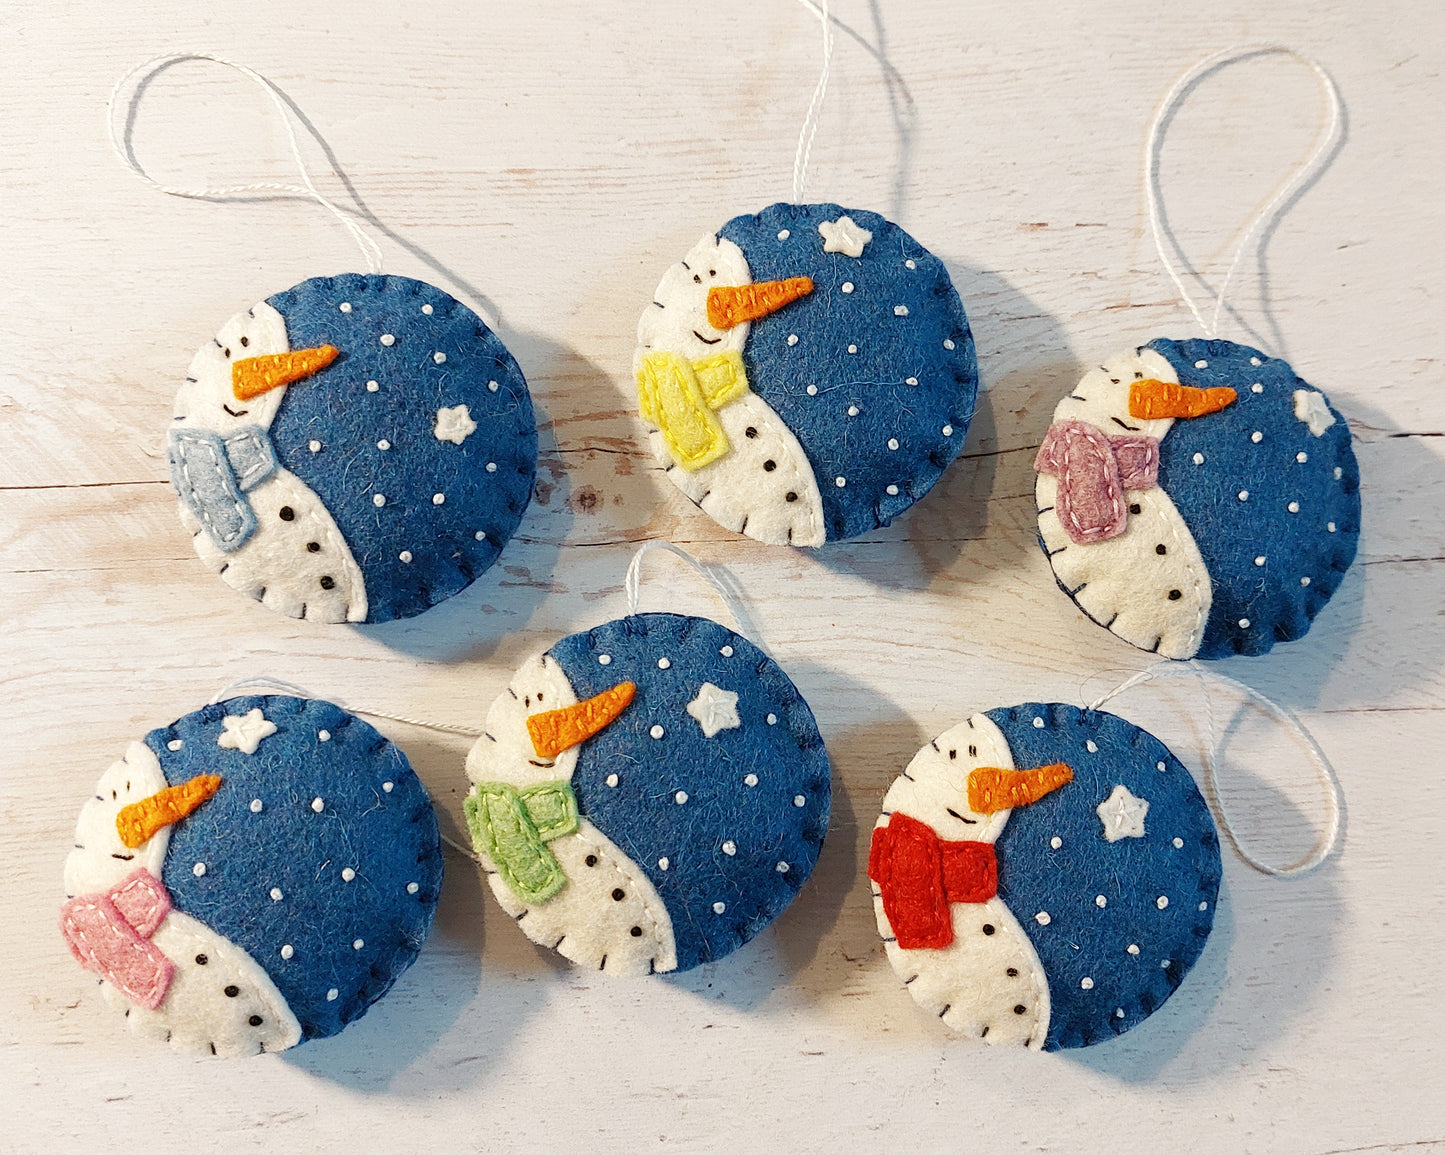 Snowmen felt ornament SET OF 6, blue and white home decoration with free shipping